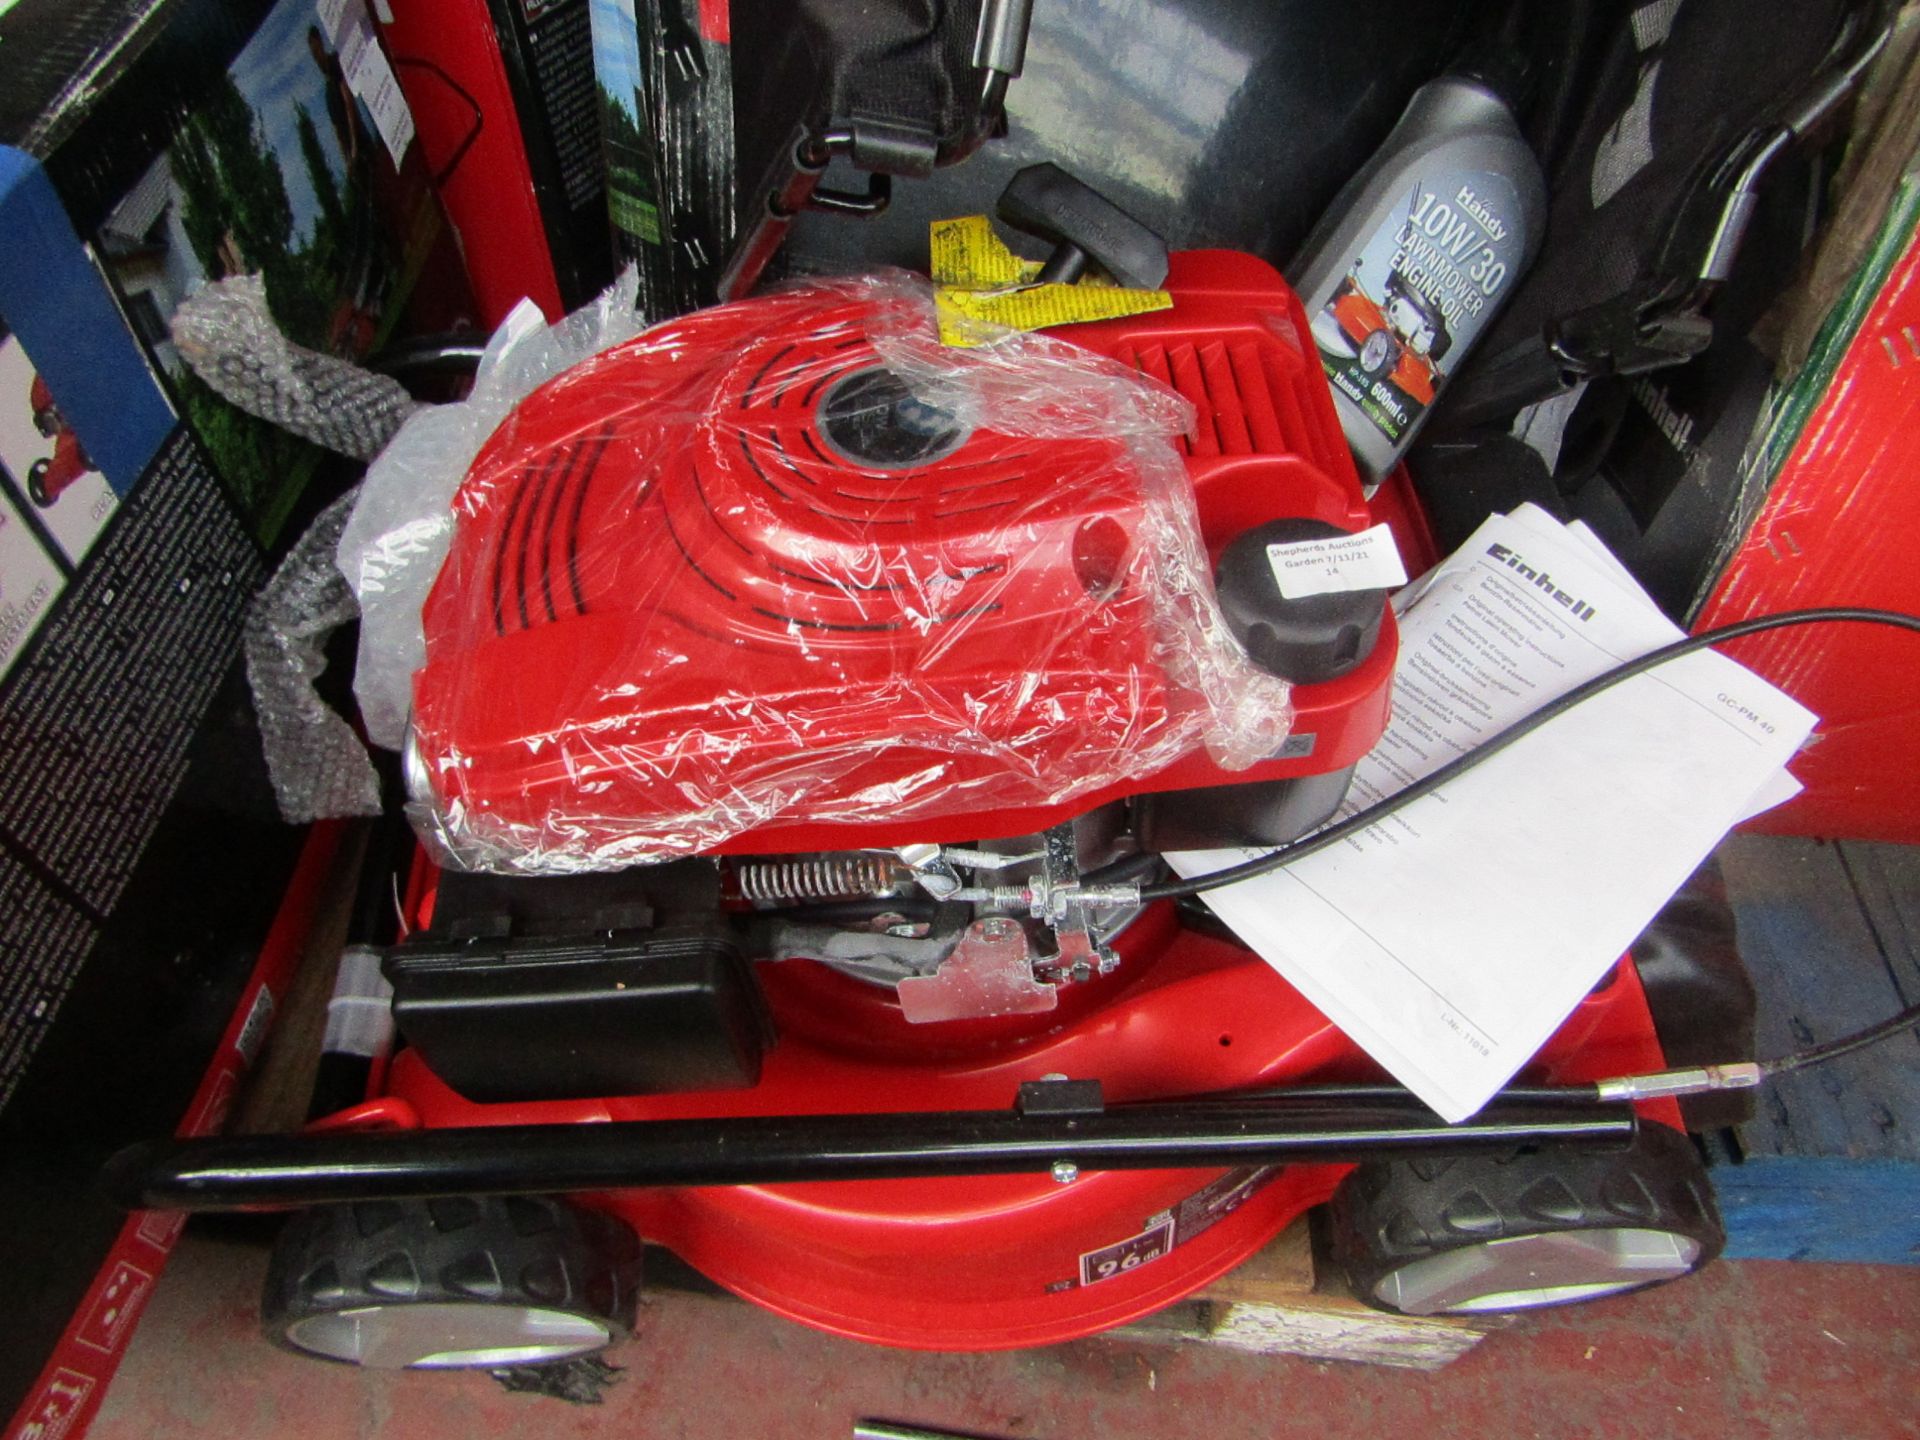 1x Einhell - GC-PM 40/1 40cm Petrol Lawn Mower - Unchecked and Untested - RRP £199. @ ToolStation.